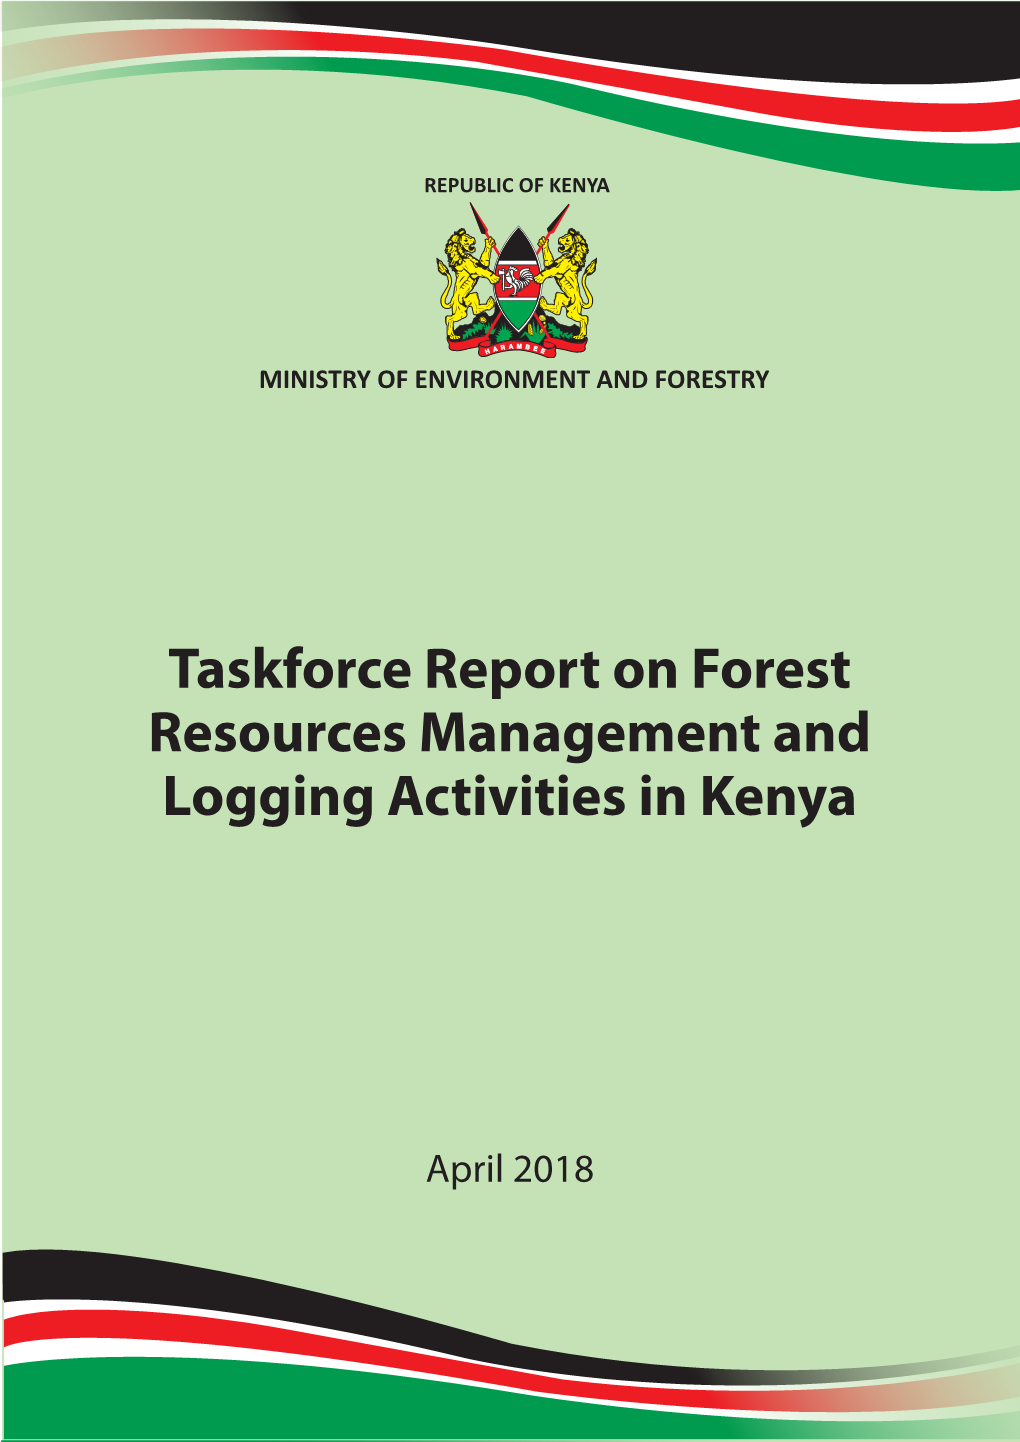 Taskforce Report on Forest Resources Management and Logging Activities in Kenya